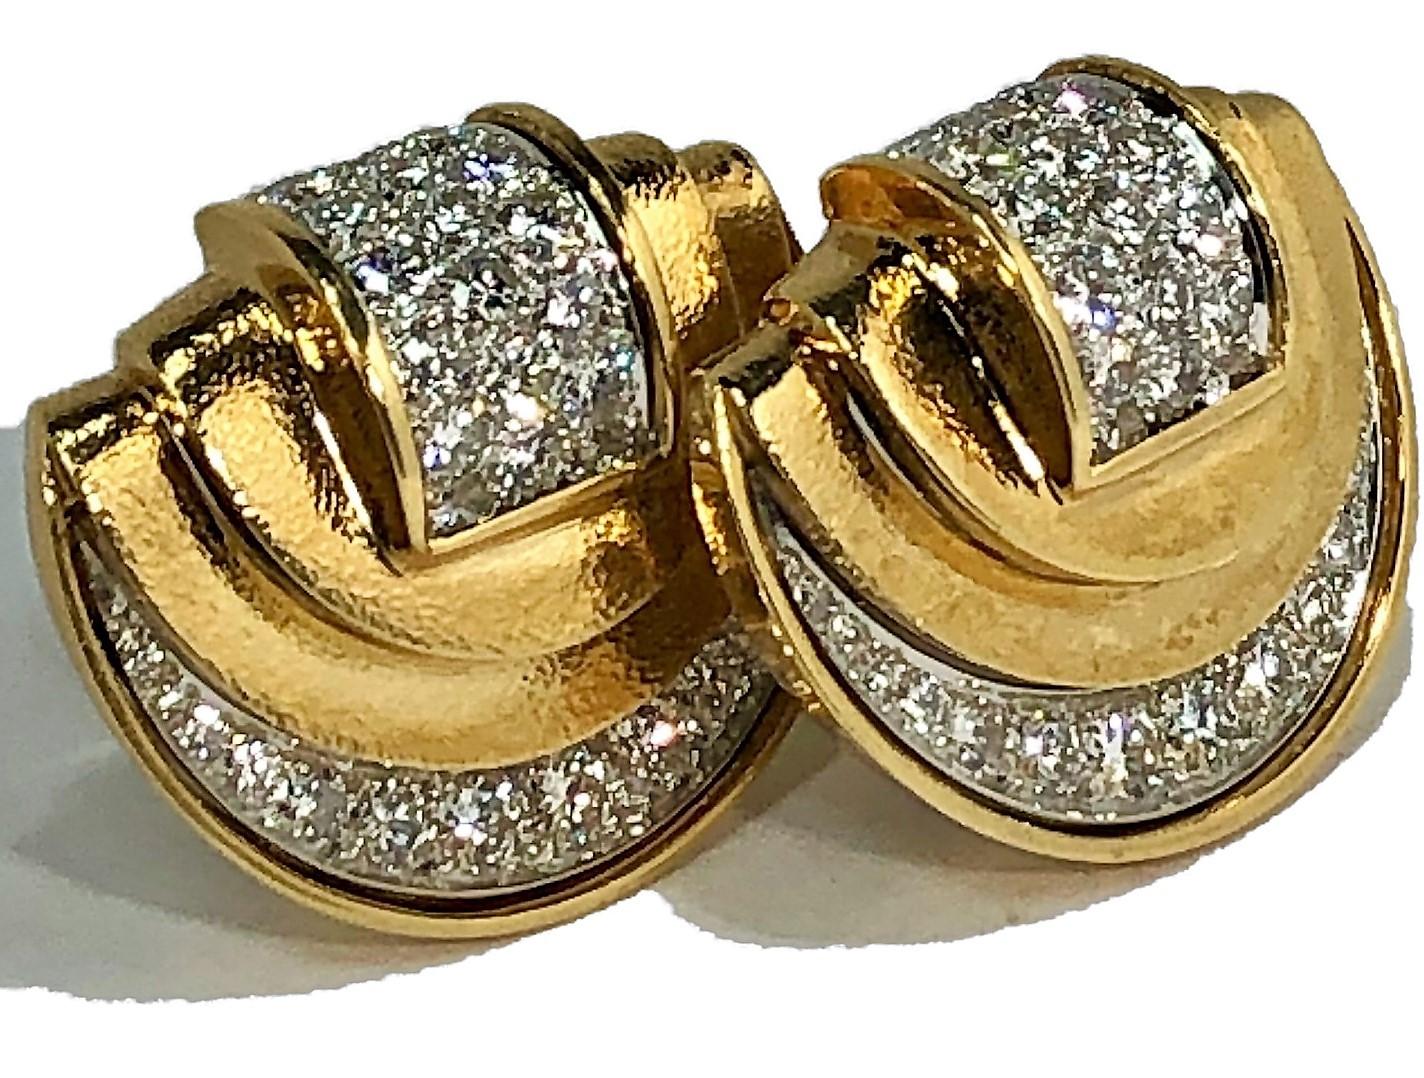 A pair of 18K yellow gold and platinum earrings, with a half moon outline, and a saddlebag design. Produced by David Webb, they measure 1 inch by 1 1/2 inches. Set with 68 round brilliant cut diamonds for a total approximate weight of 6.25ct, the